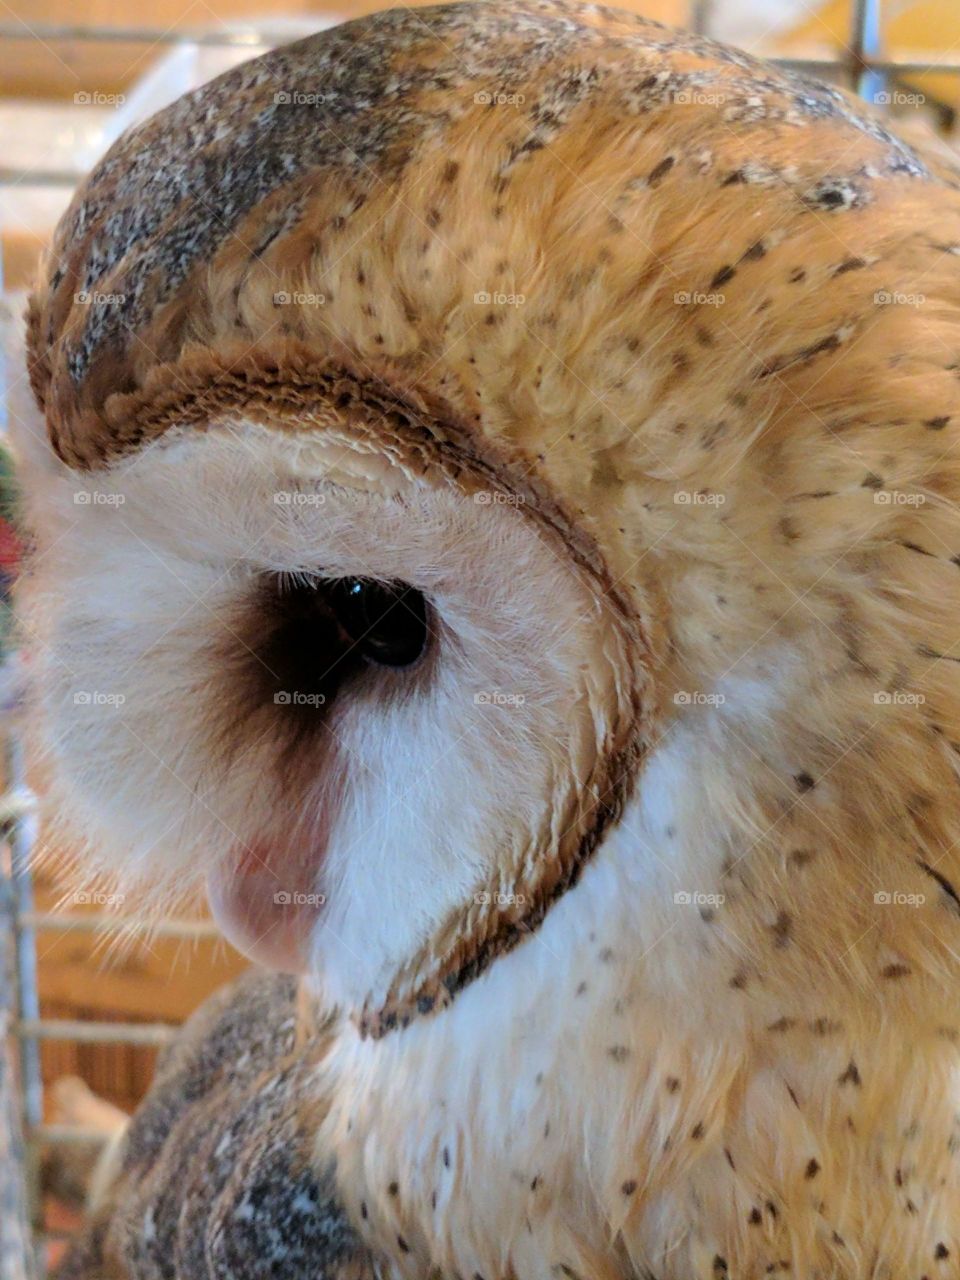 beautiful close-up of an owl at a wildlife refuge